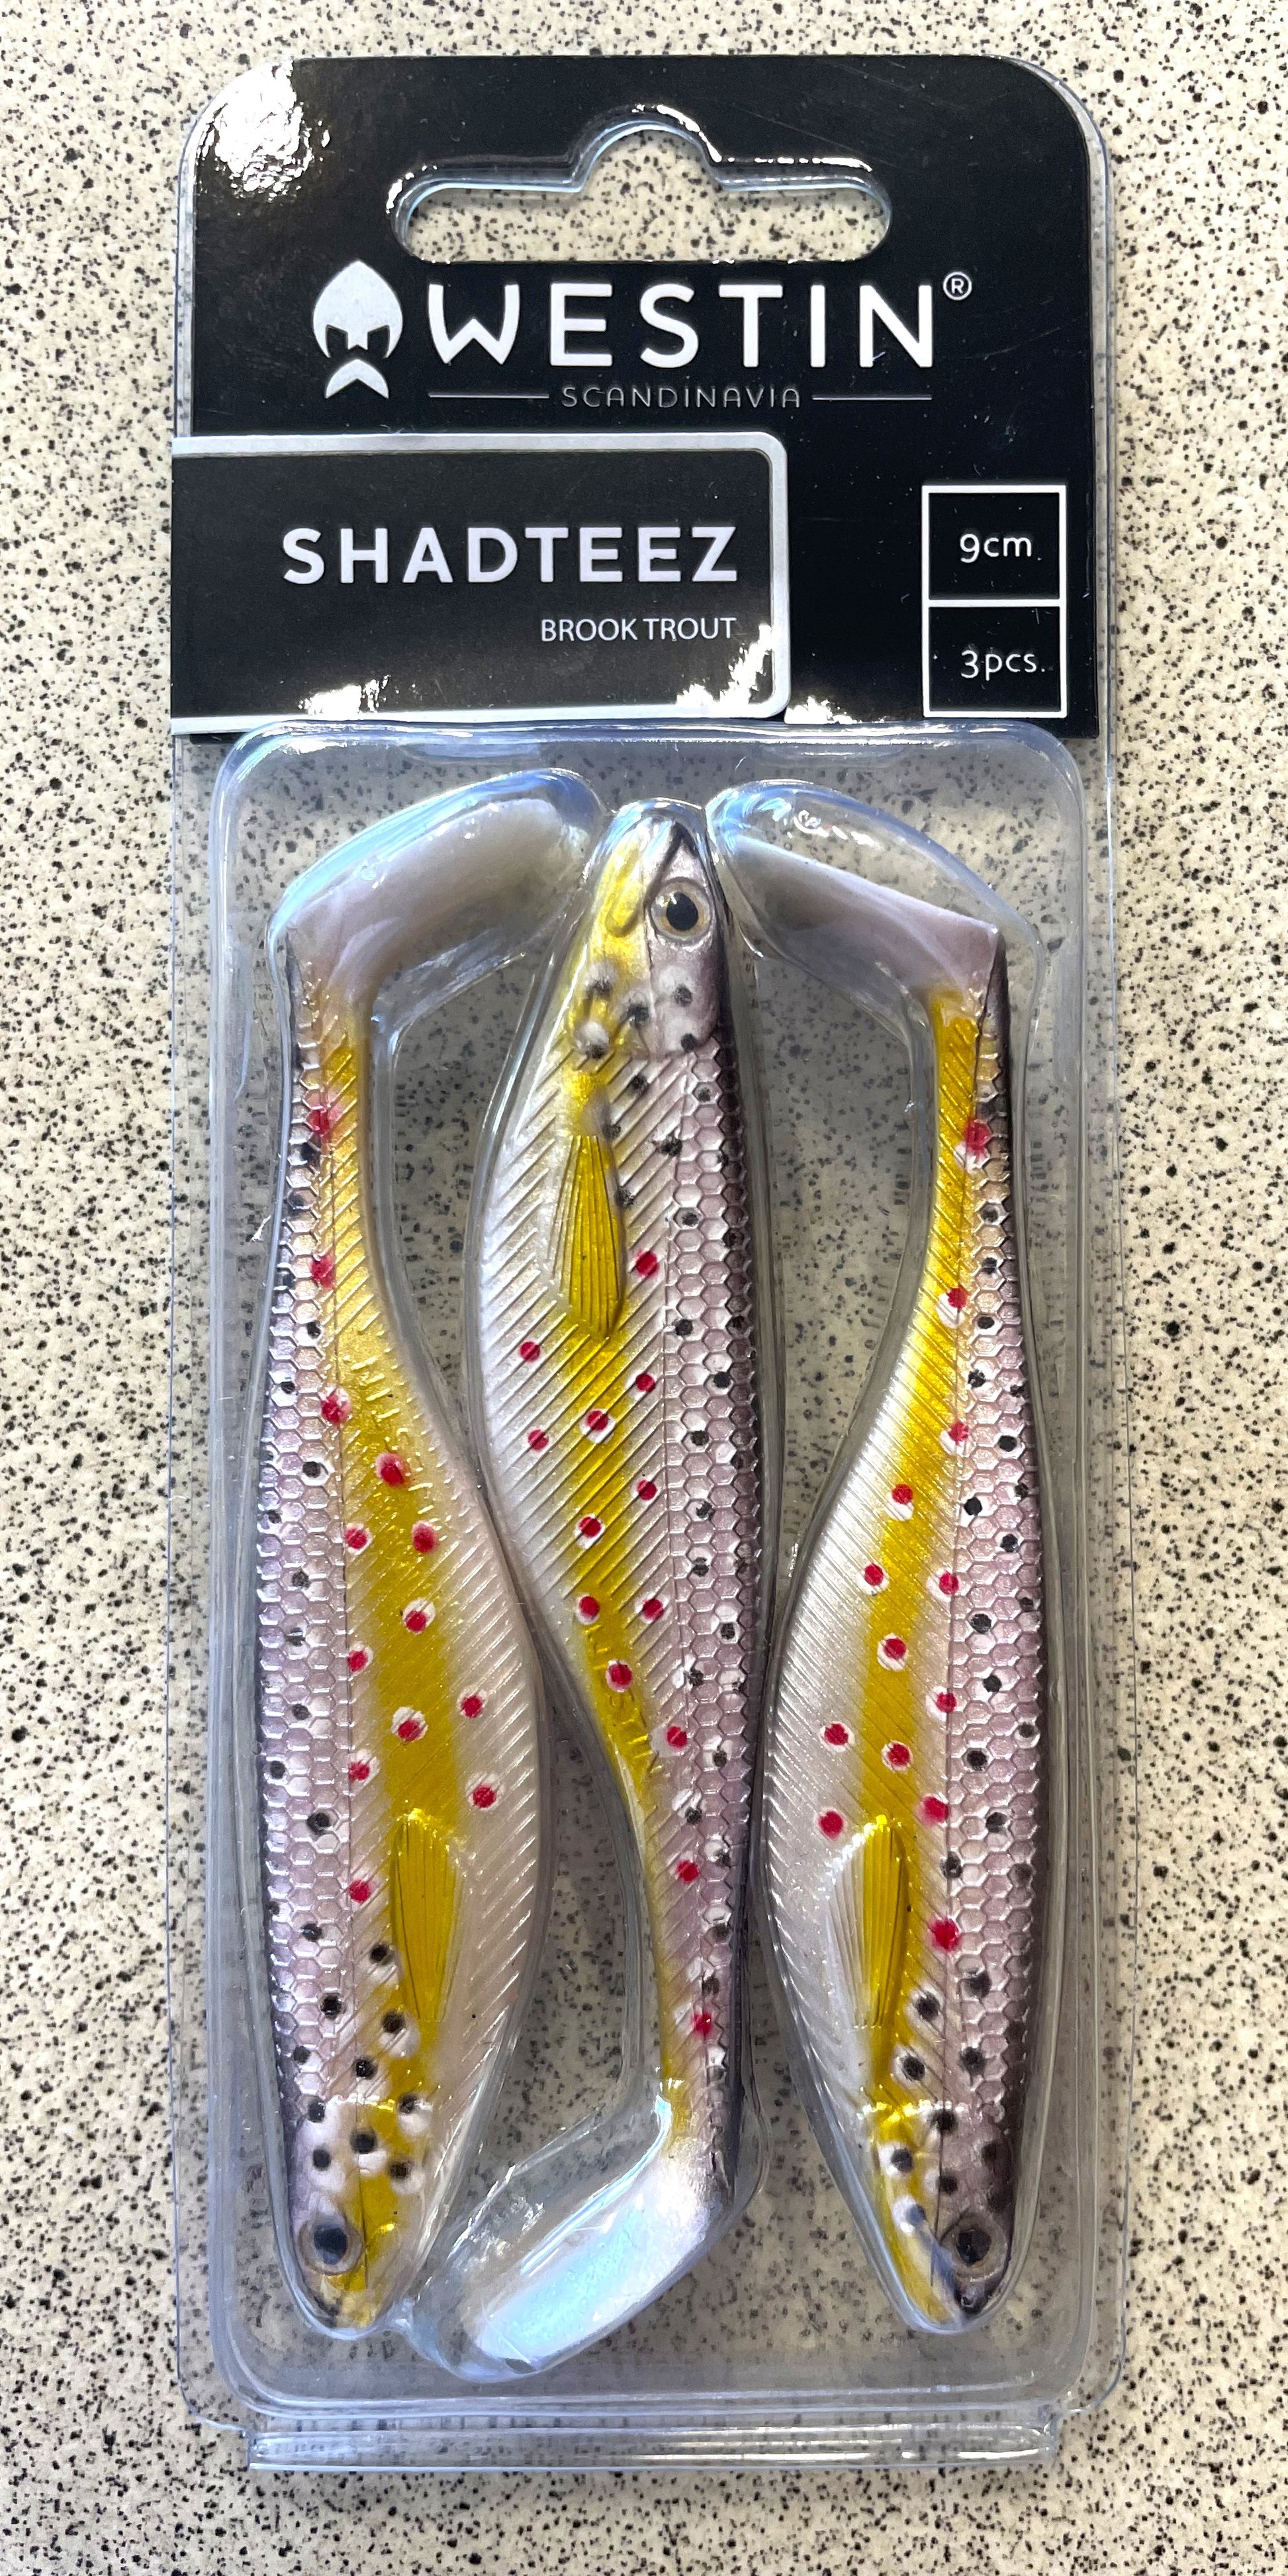 WESTIN Shadteez 9cm (3pk) - Brook Trout – Trophy Trout Lures and